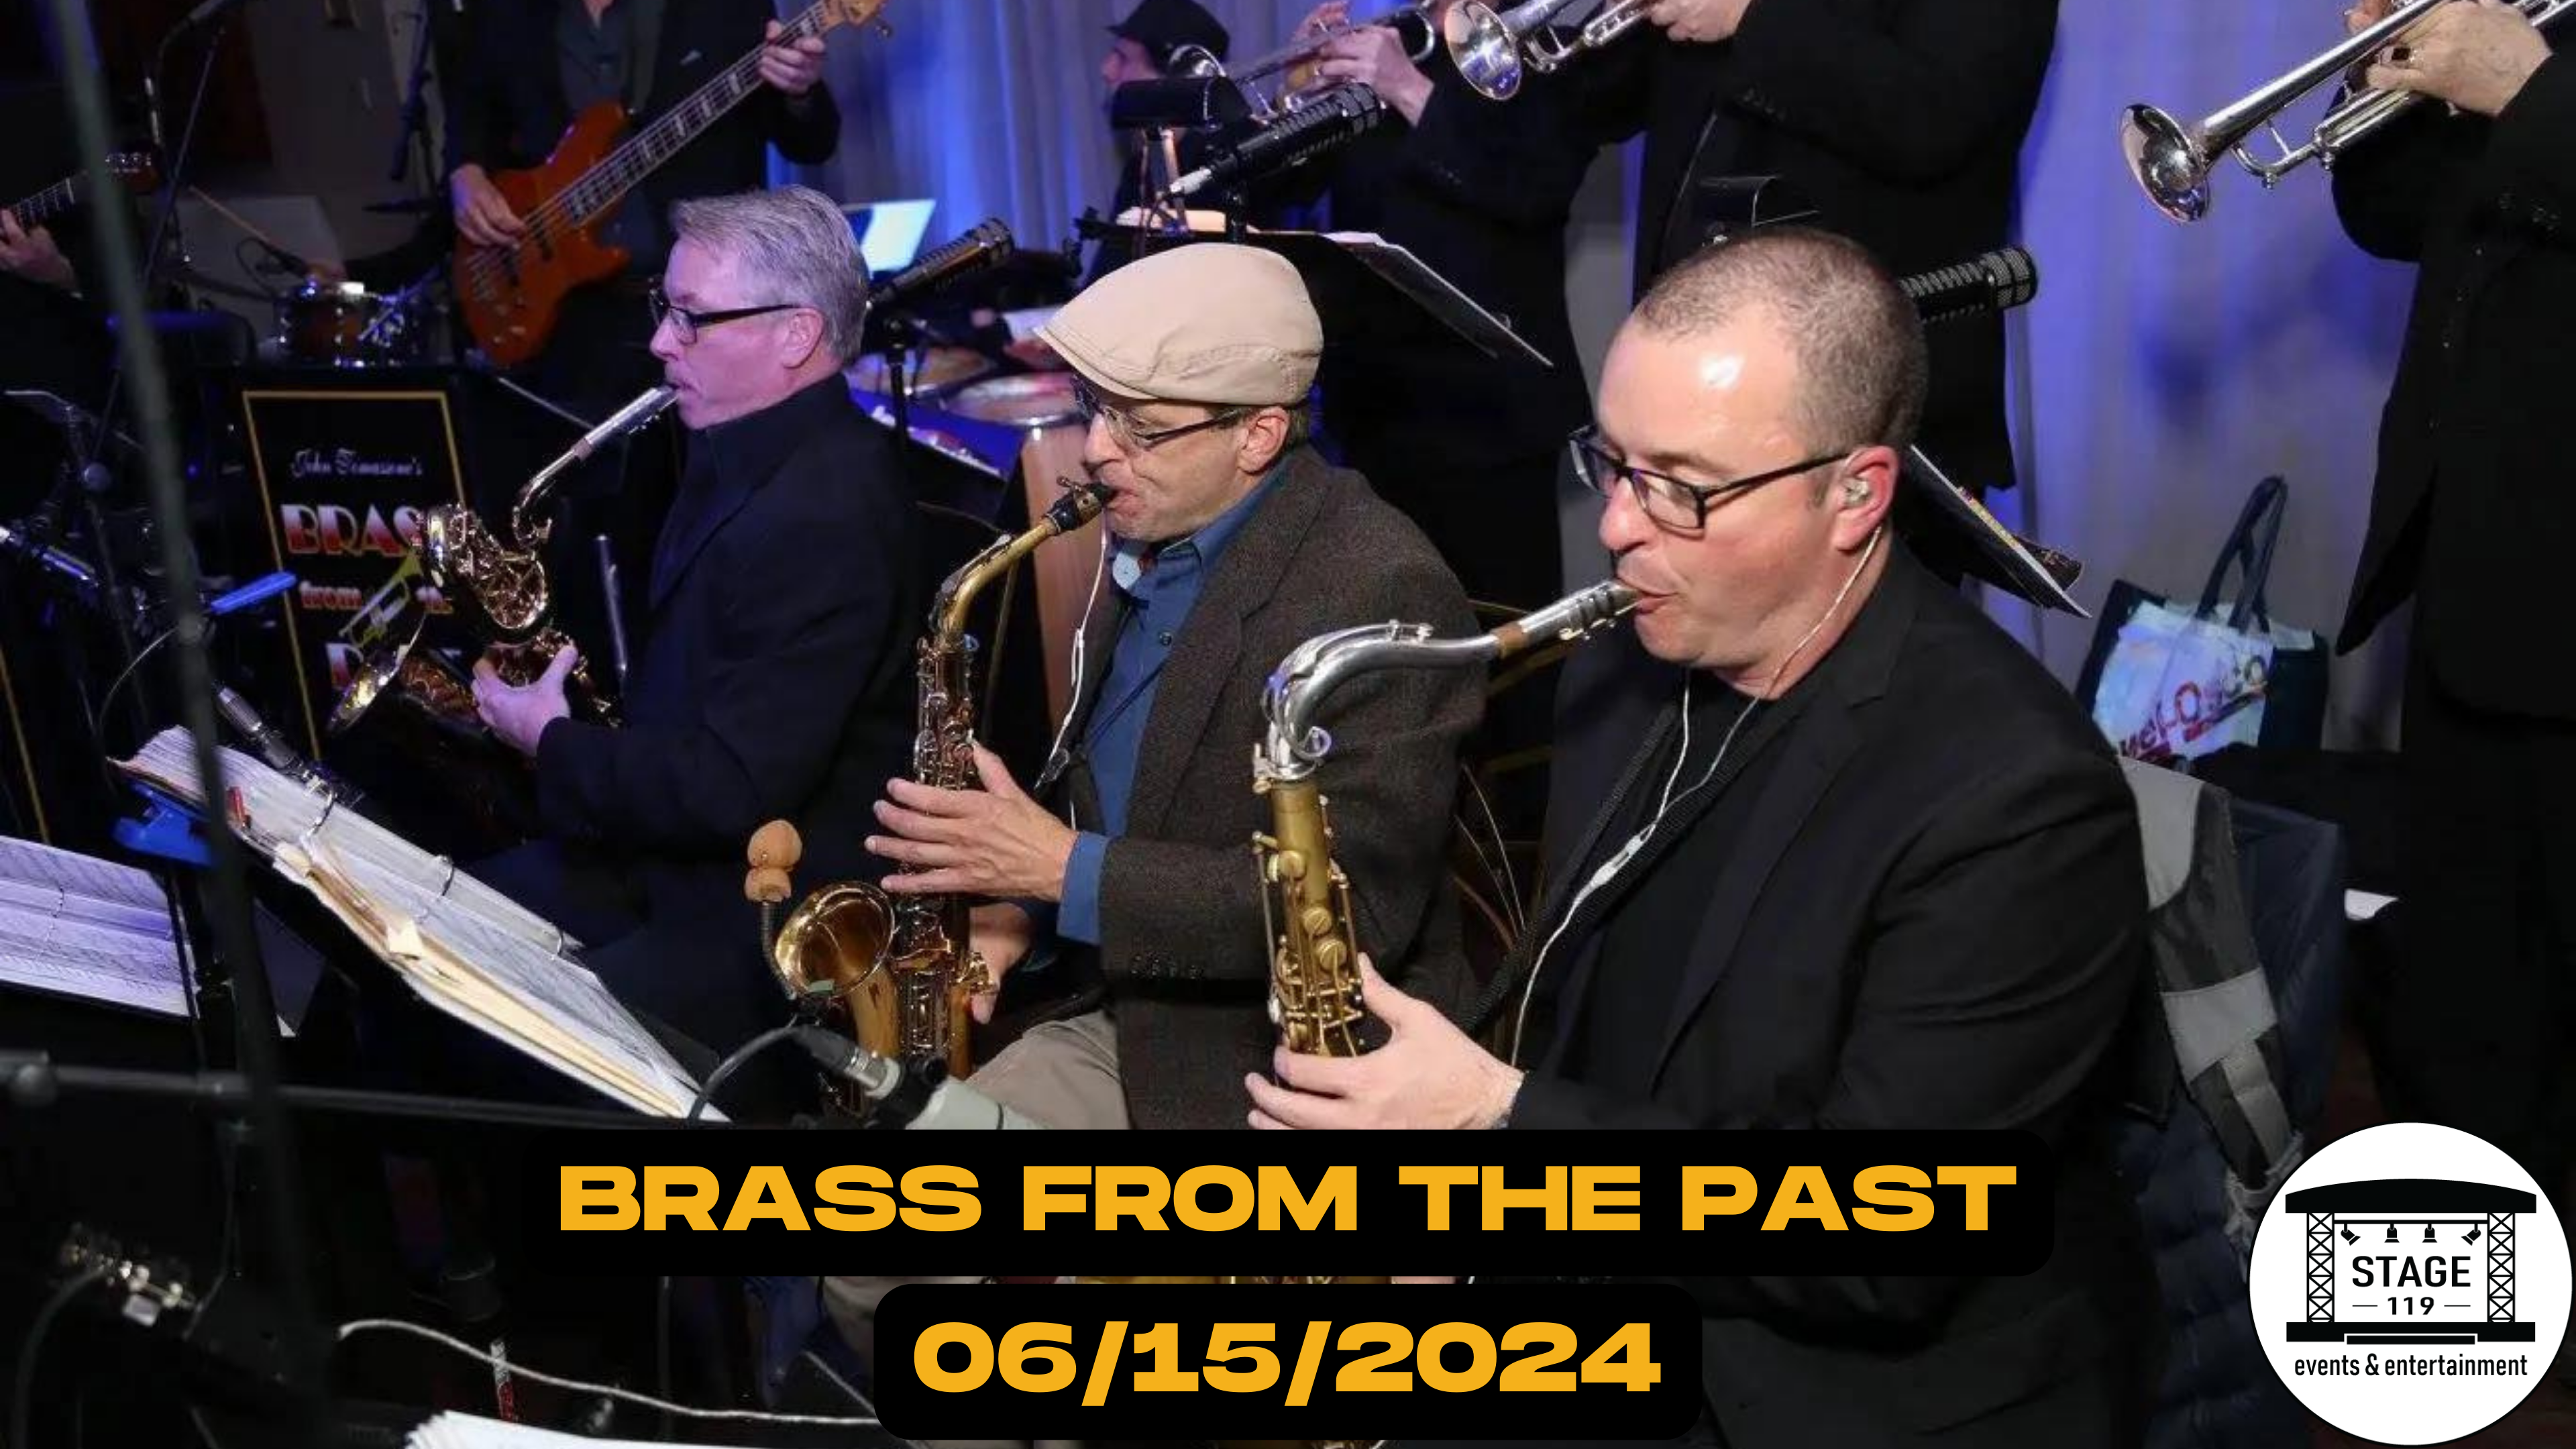 BRASS FROM THE PAST at Stage 119